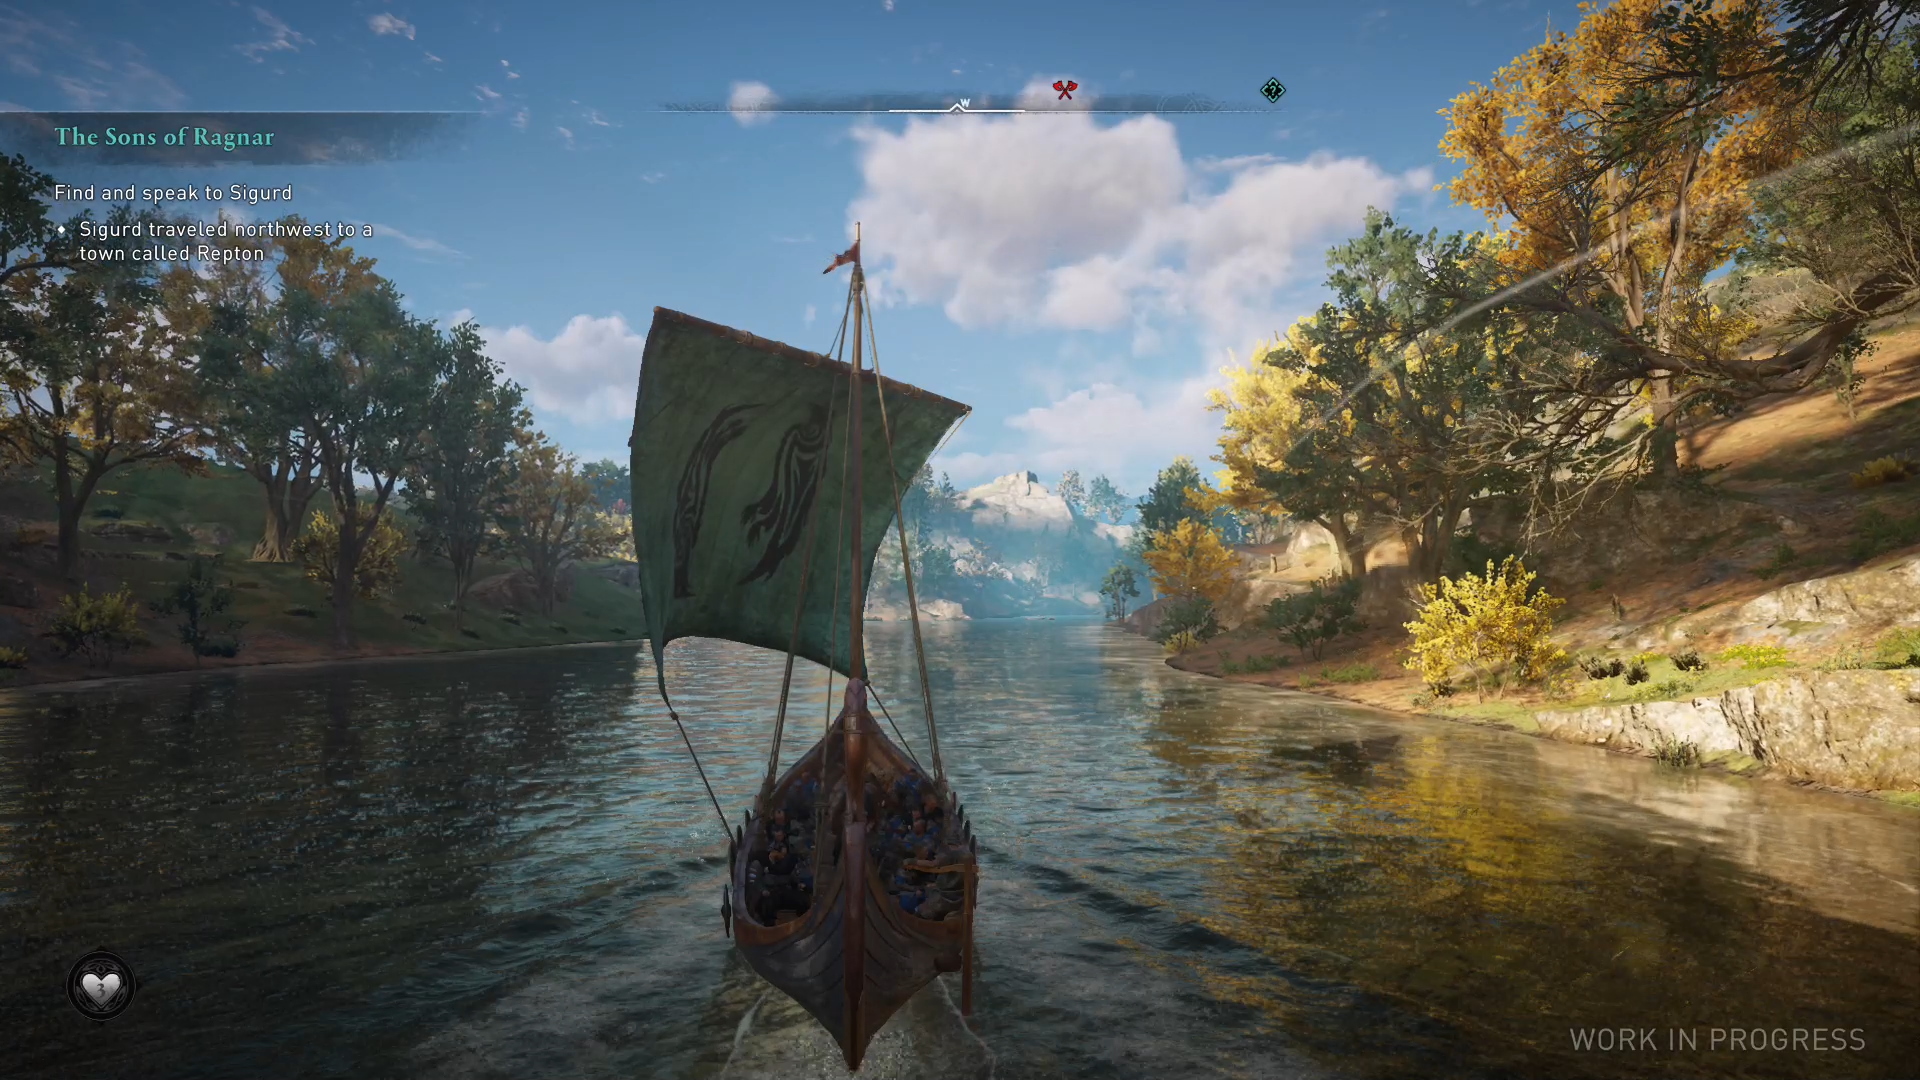 Assassin's Creed Valhalla review: A Viking story of faith and